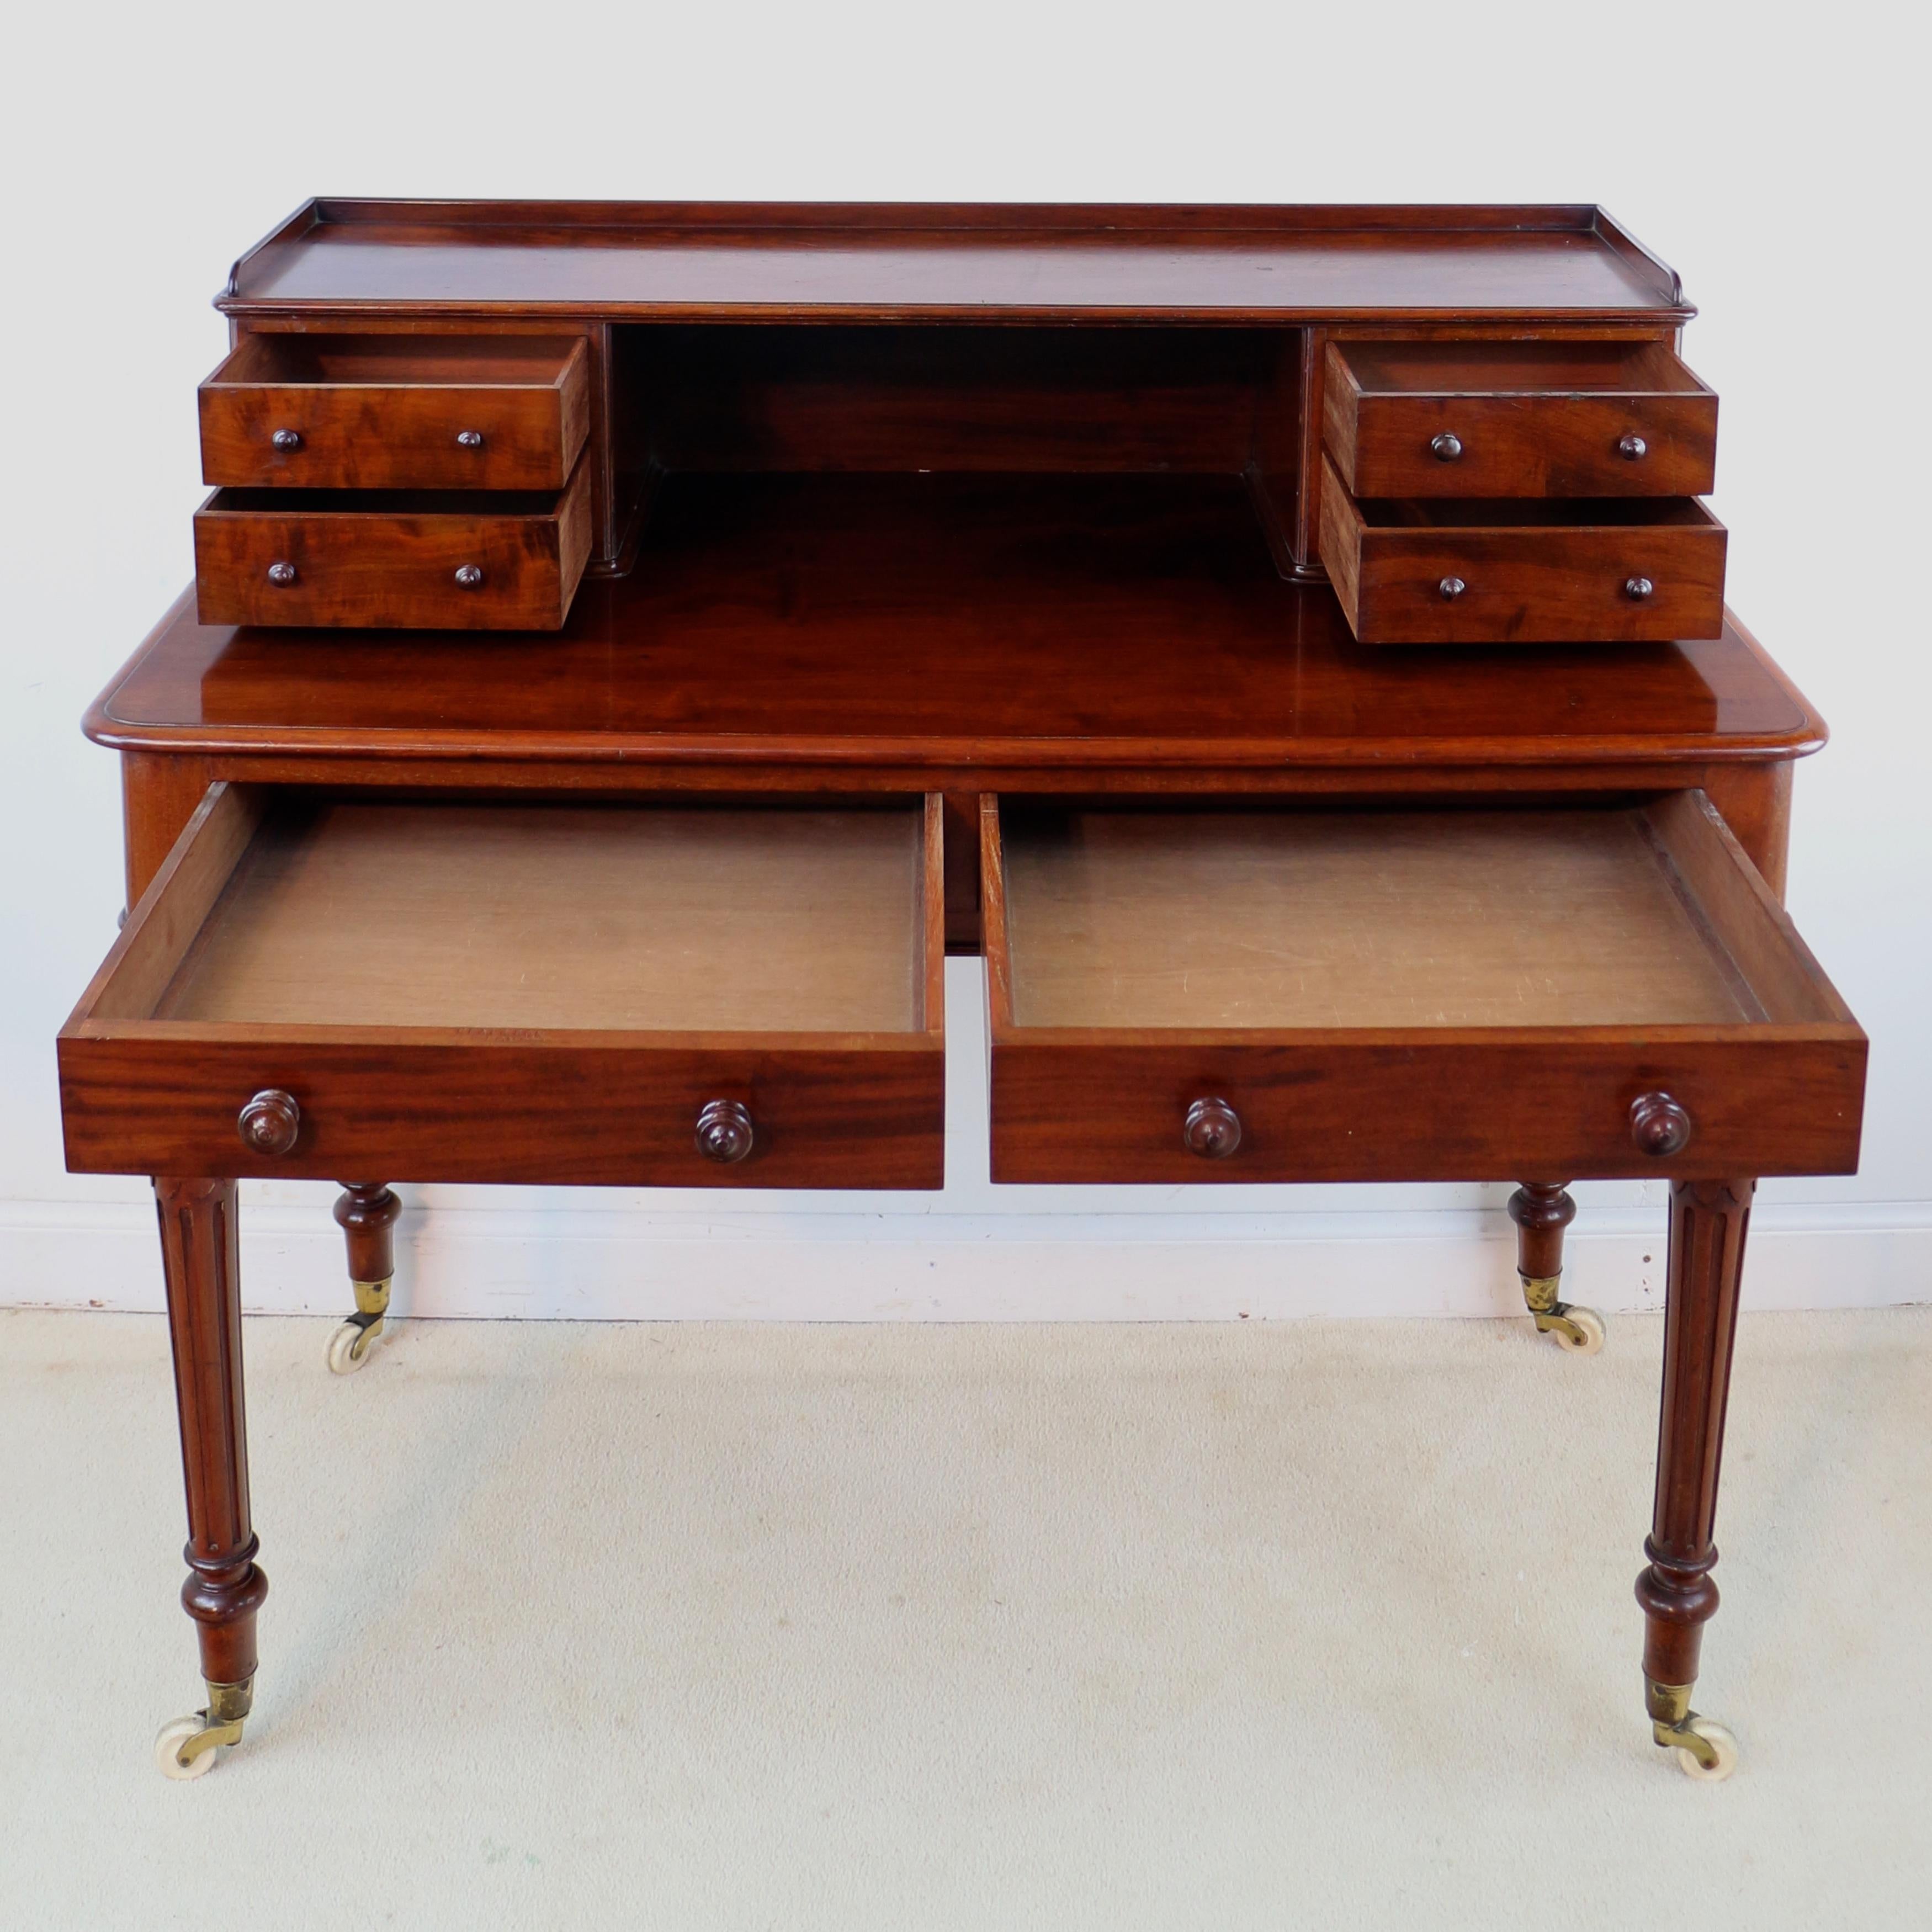 Antique English Victorian Mahogany Writing Table or Desk by Heal’s of London 10